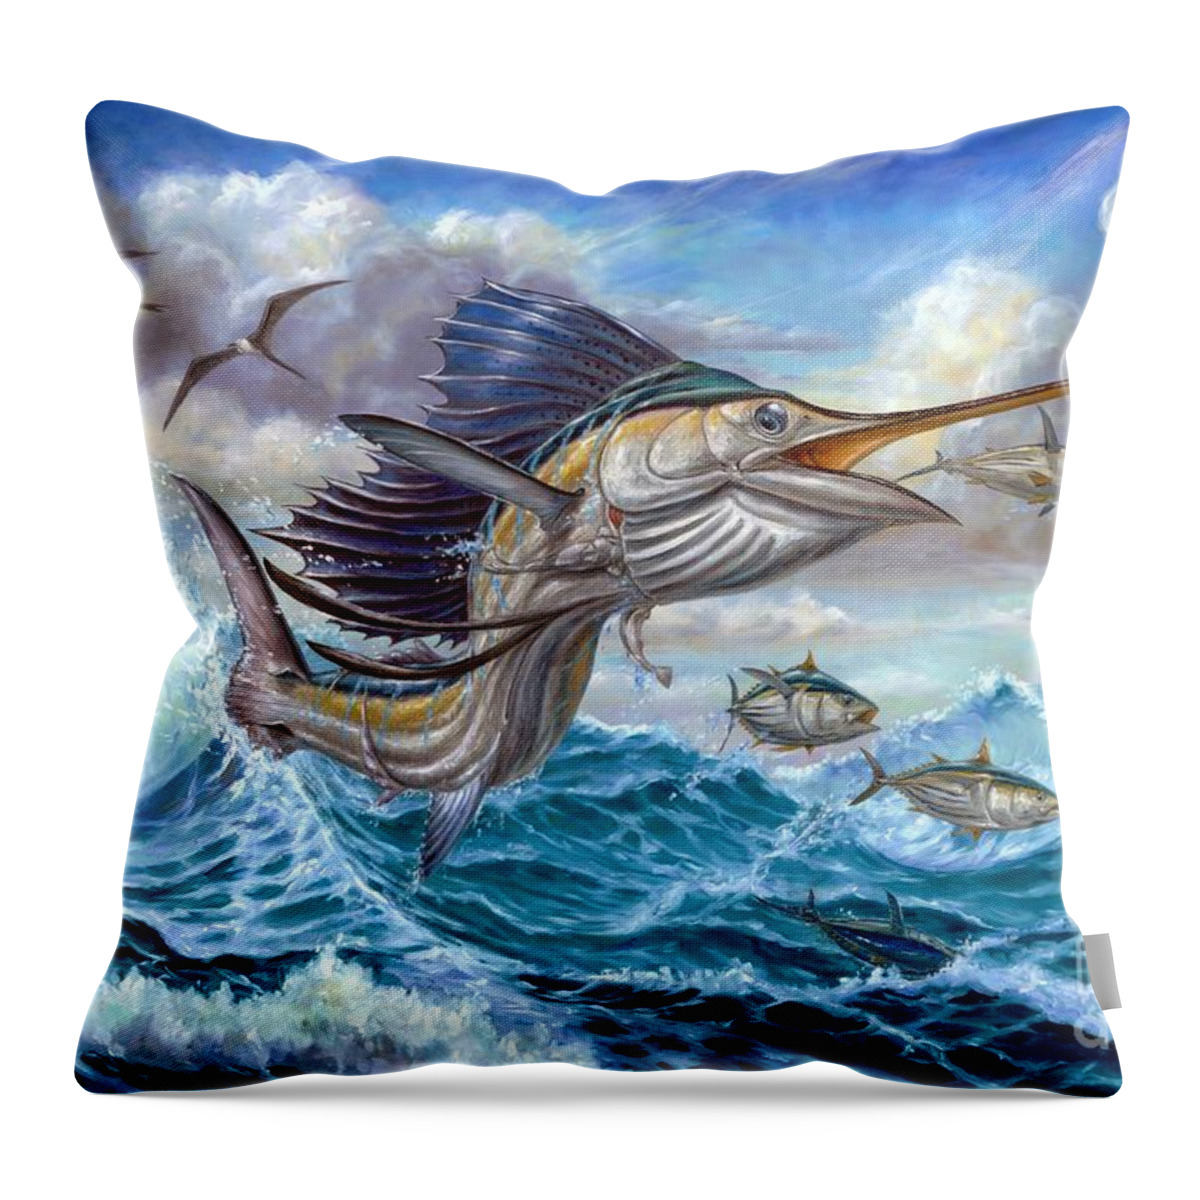 Sailfish Small Tuna Throw Pillow featuring the painting Jumping Sailfish And Small Fish by Terry Fox